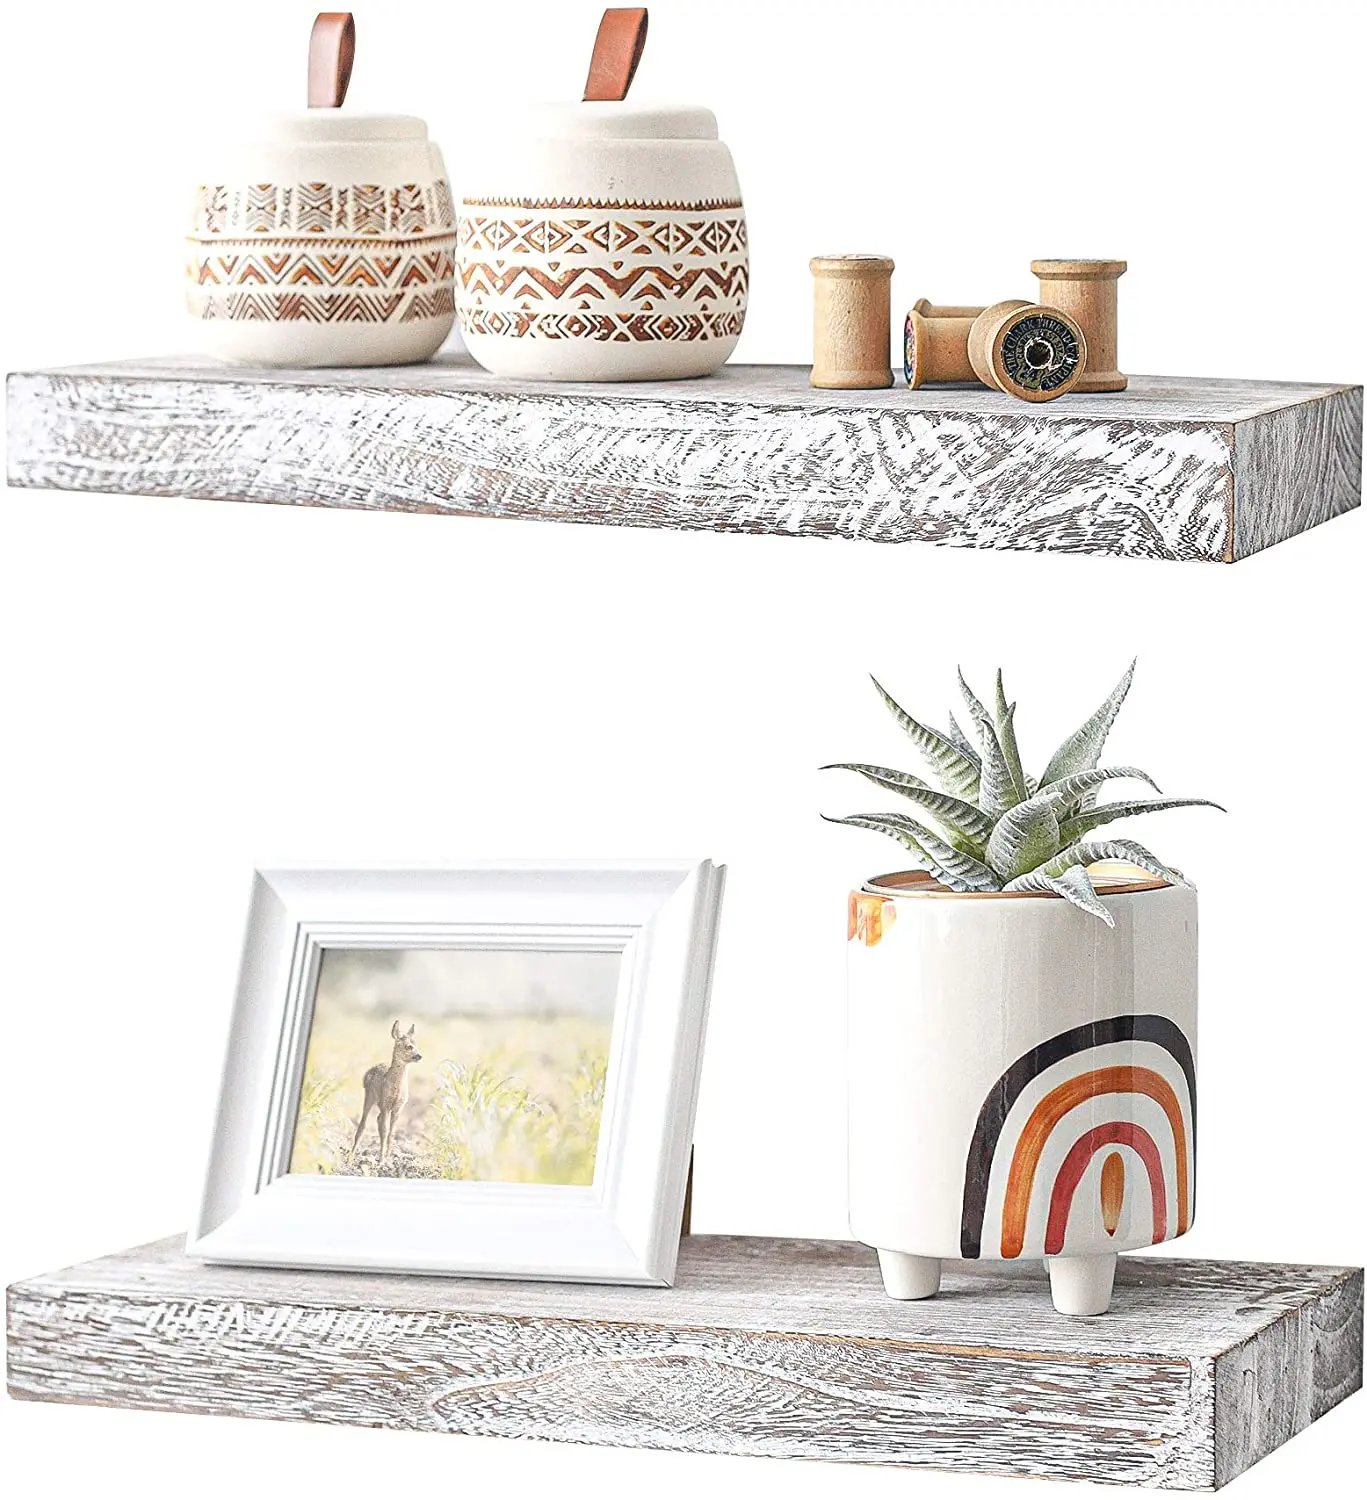 Farmhouse Floating Shelves Wall Mounted,2-pack Rustic Solid Wood Display  Ledges And Rack For Home Decor,Trophy Display - Buy Floating Shelves Wall  Mounted,Wood Display Ledges,Dvd Wall Display Shelf Product on Alibaba.com